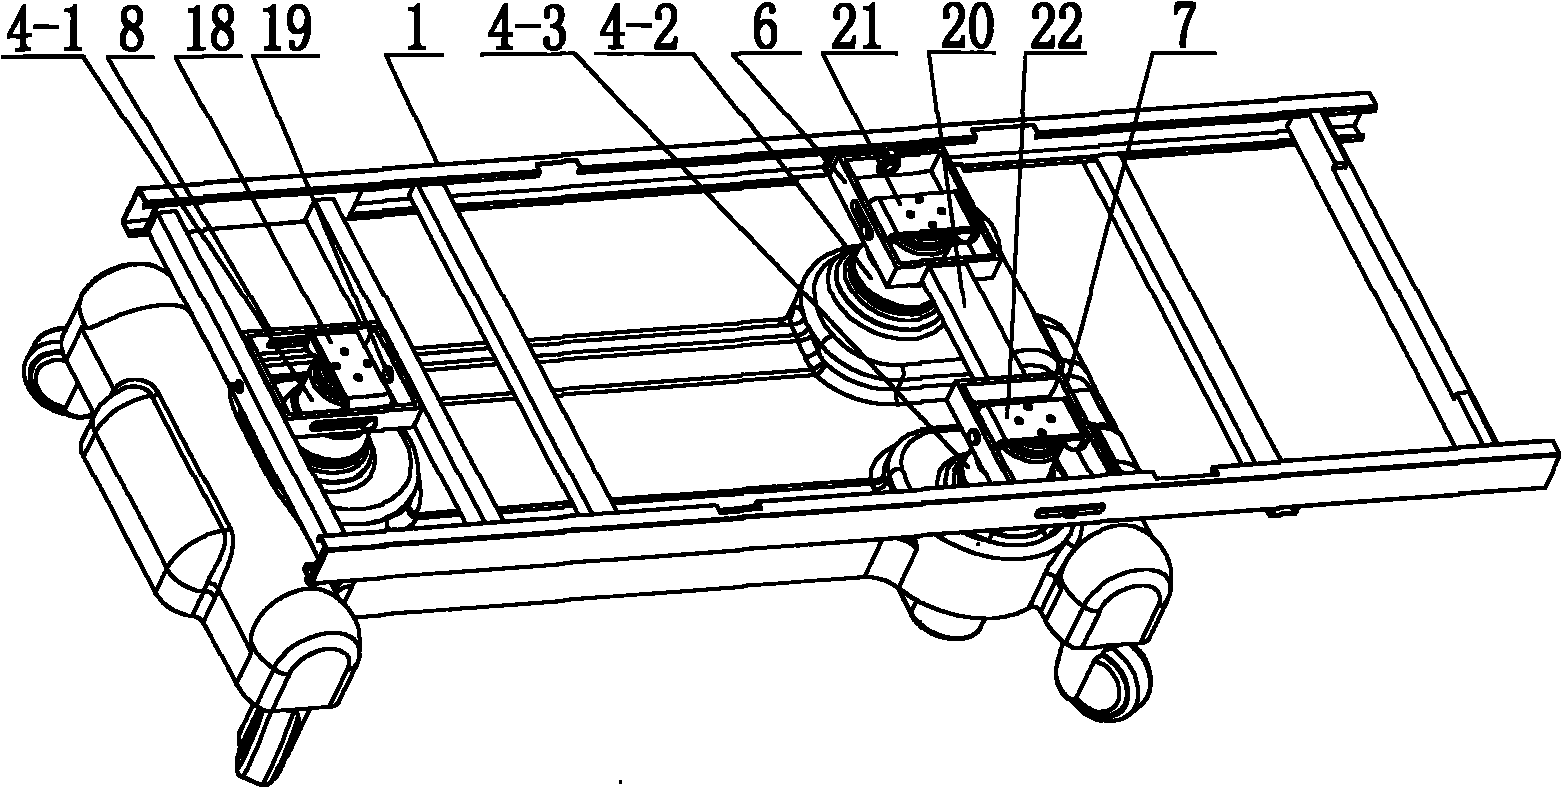 Full-automatic lifting hospital bed and control method